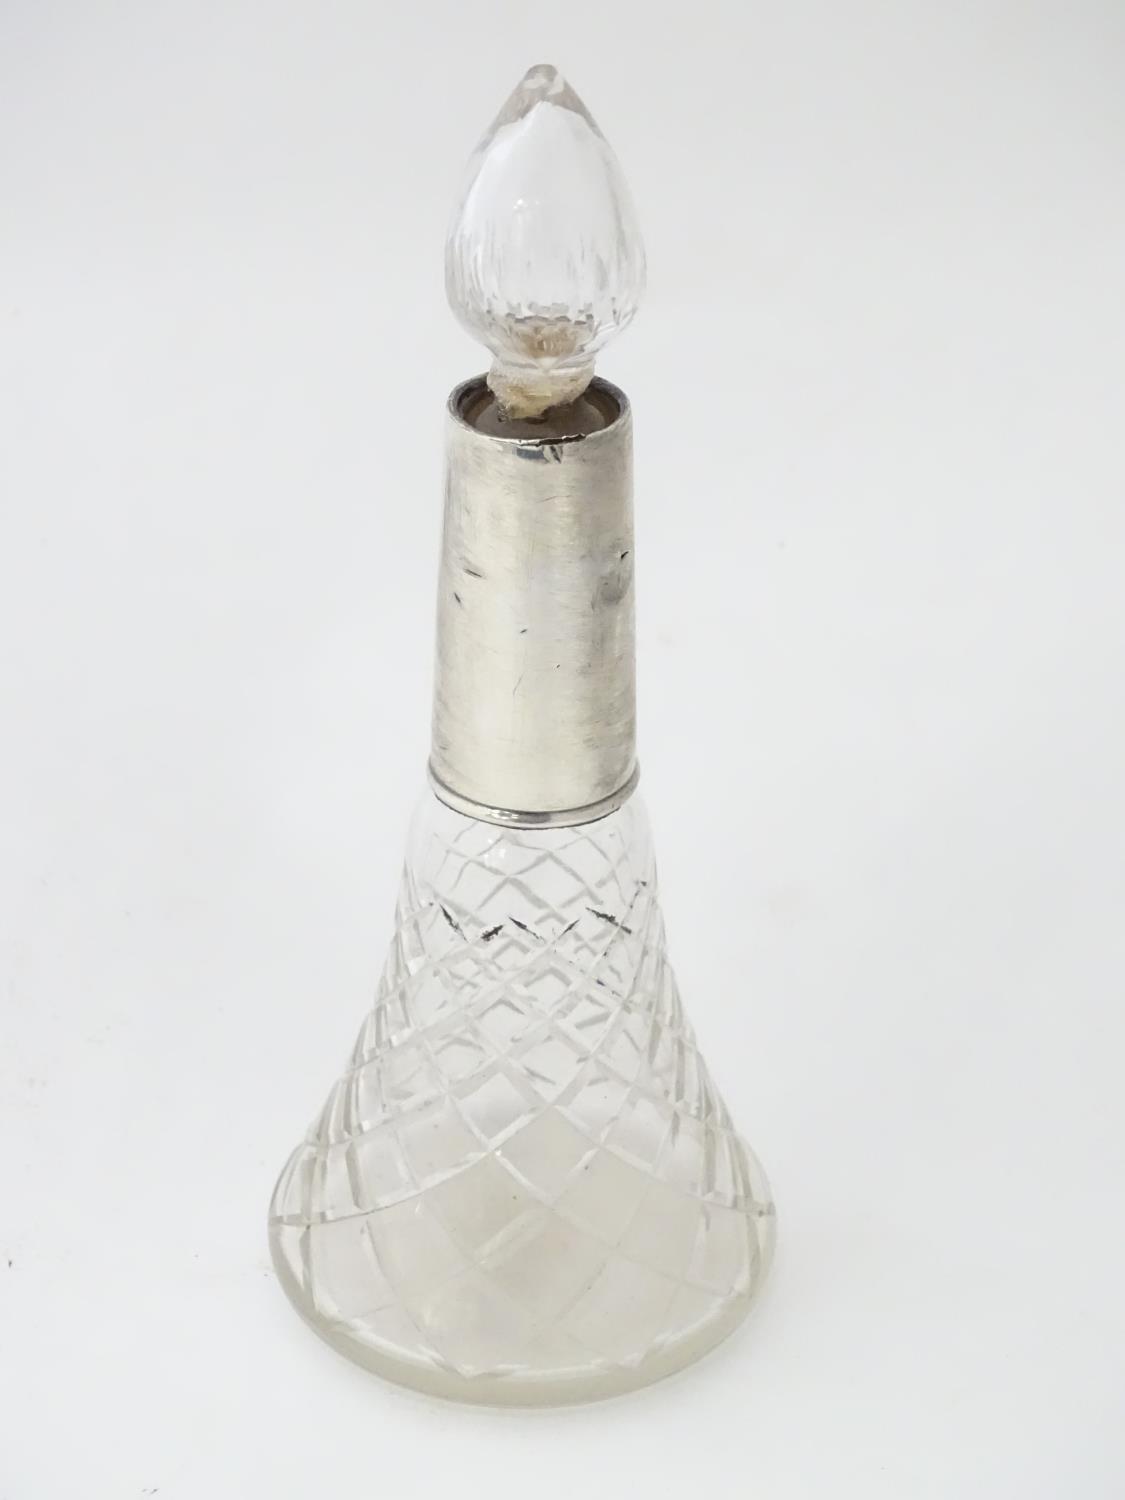 Victorian perfume / scent bottle Please Note - we do not make reference to the condition of lots